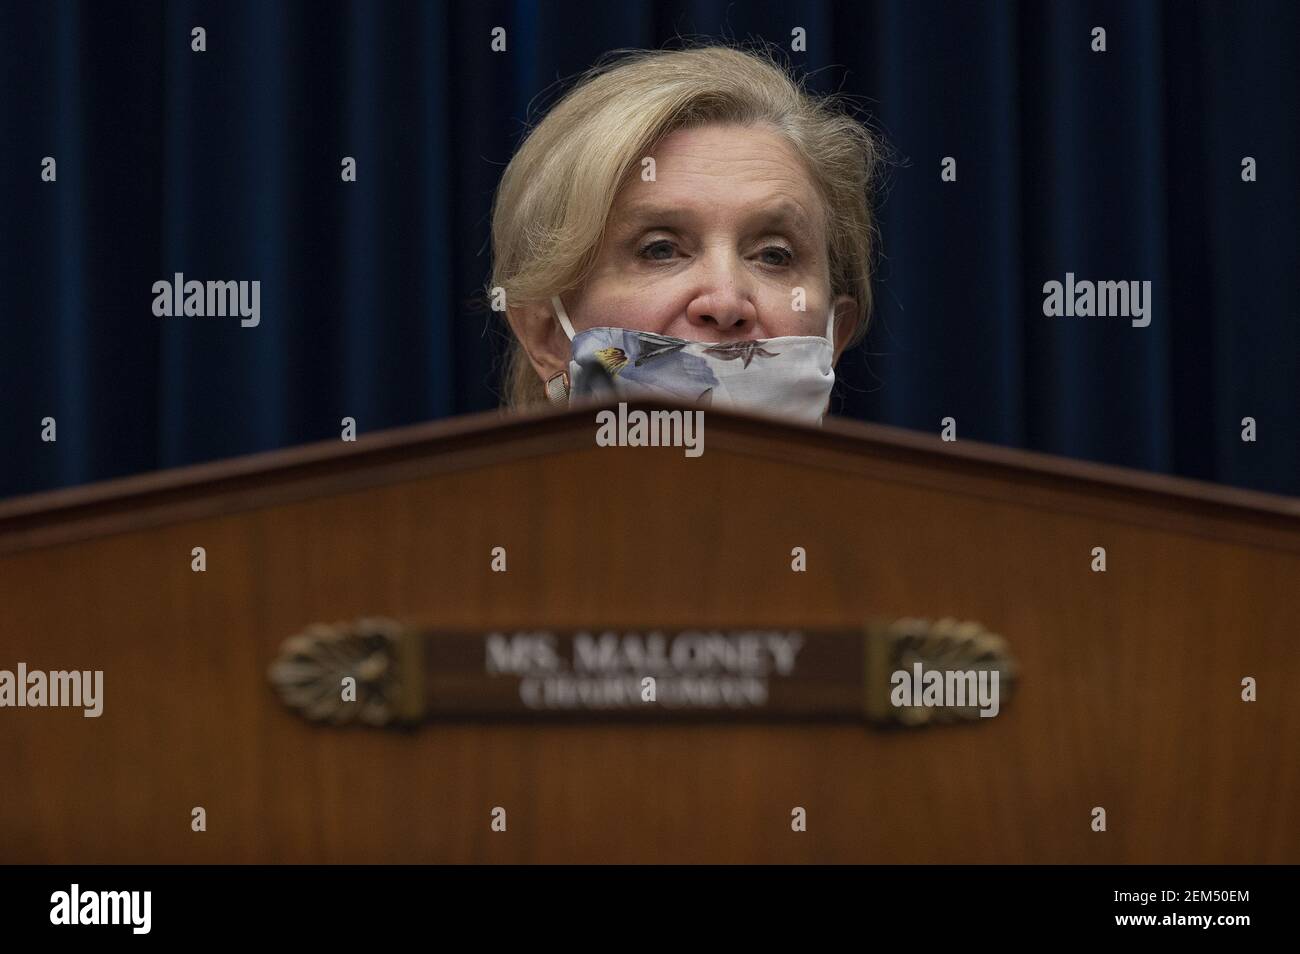 Washington, United States. 24th Feb, 2021. Chairwoman Carolyn Maloney, D-New York, speaks during a House Oversight and Reform Committee hearing on "Legislative Proposals to Put the Postal Service on Sustainable Financial Footing" on Capitol Hill in Washington, DC, on February 24, 2021. Pool Photo by Jim Watson/UPI Credit: UPI/Alamy Live News Stock Photo